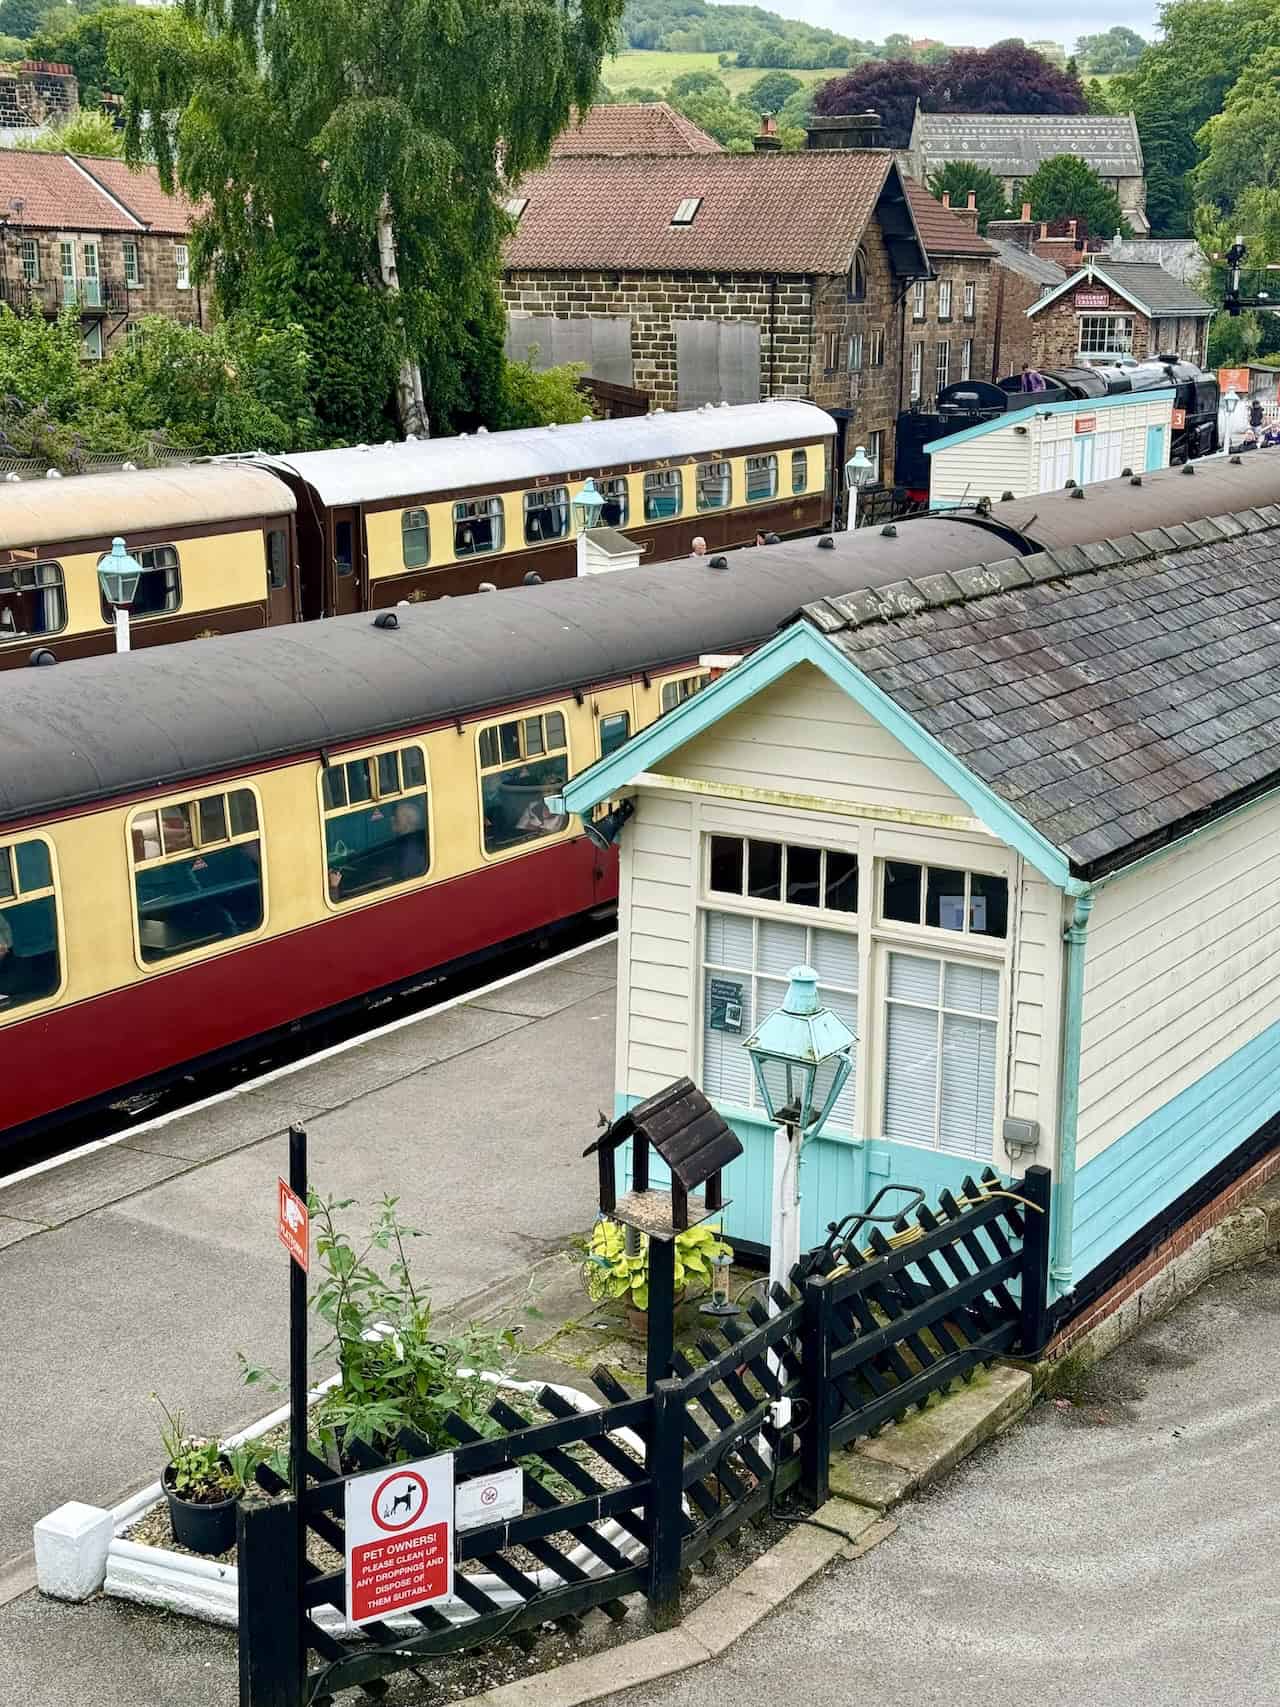 View from the footbridge crossing the railway line at Grosmont Station, offering wonderful elevated views.